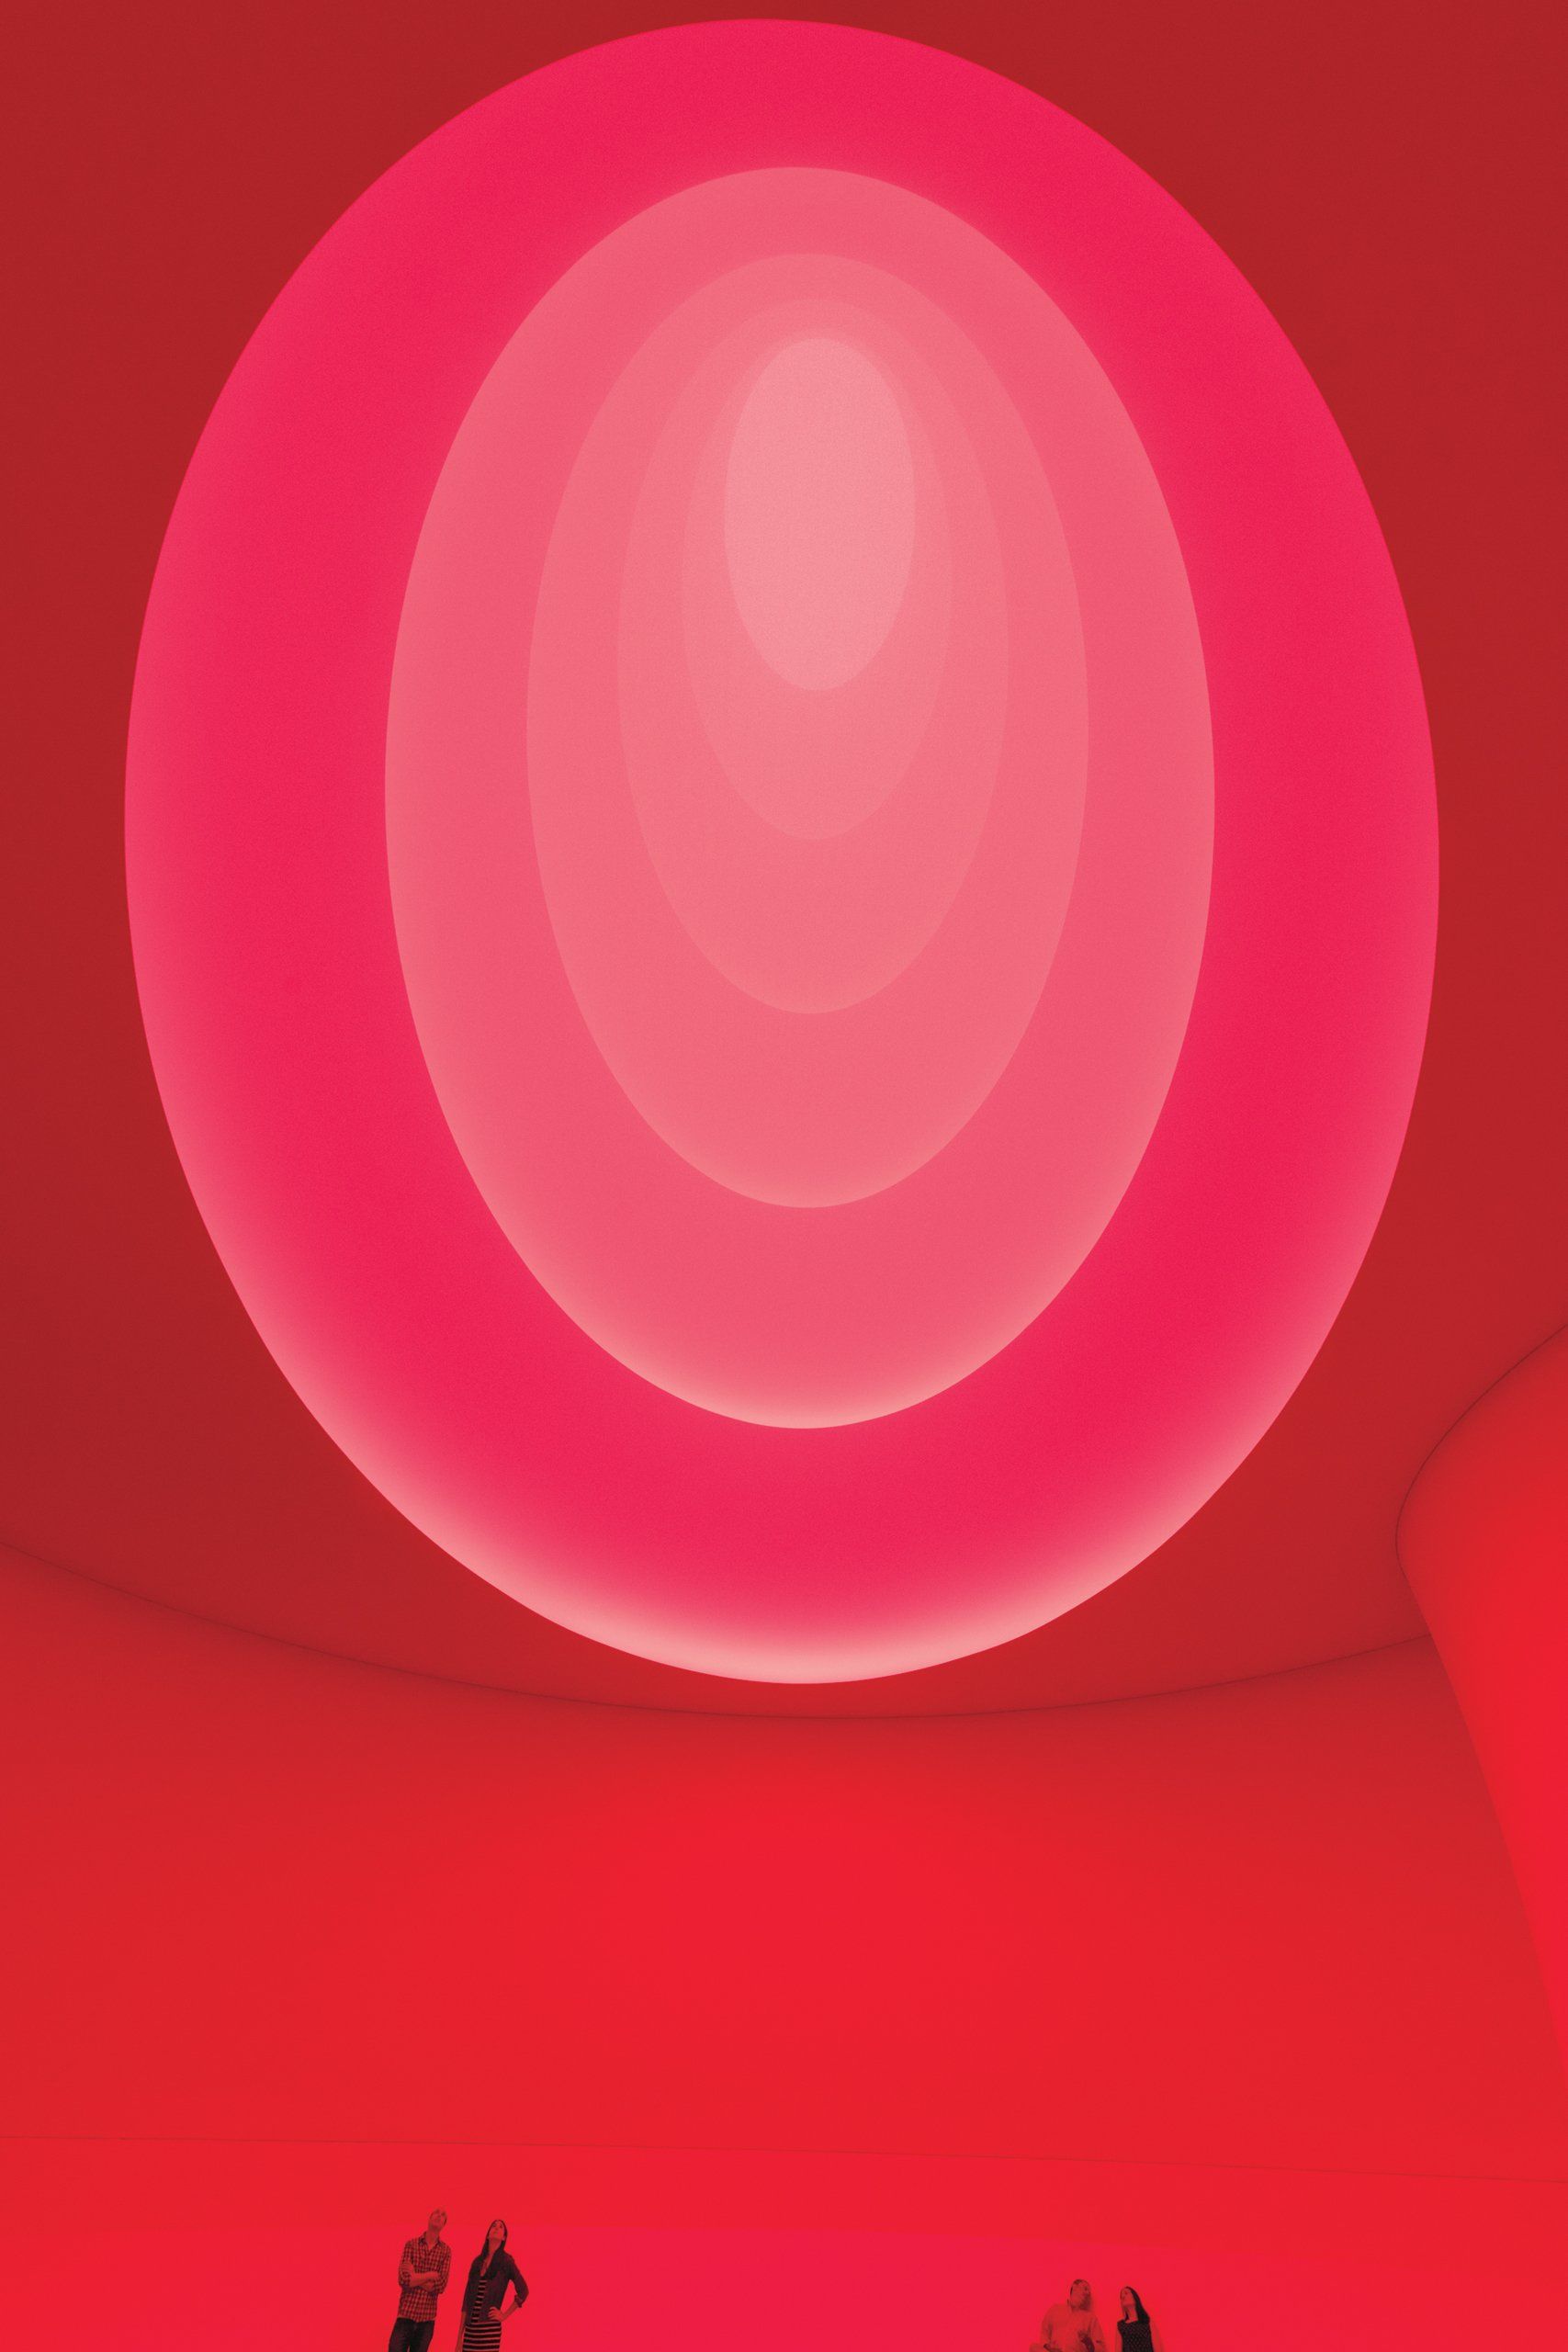 James Turrell Experiments With The Thingness Of Light Itself  NPR